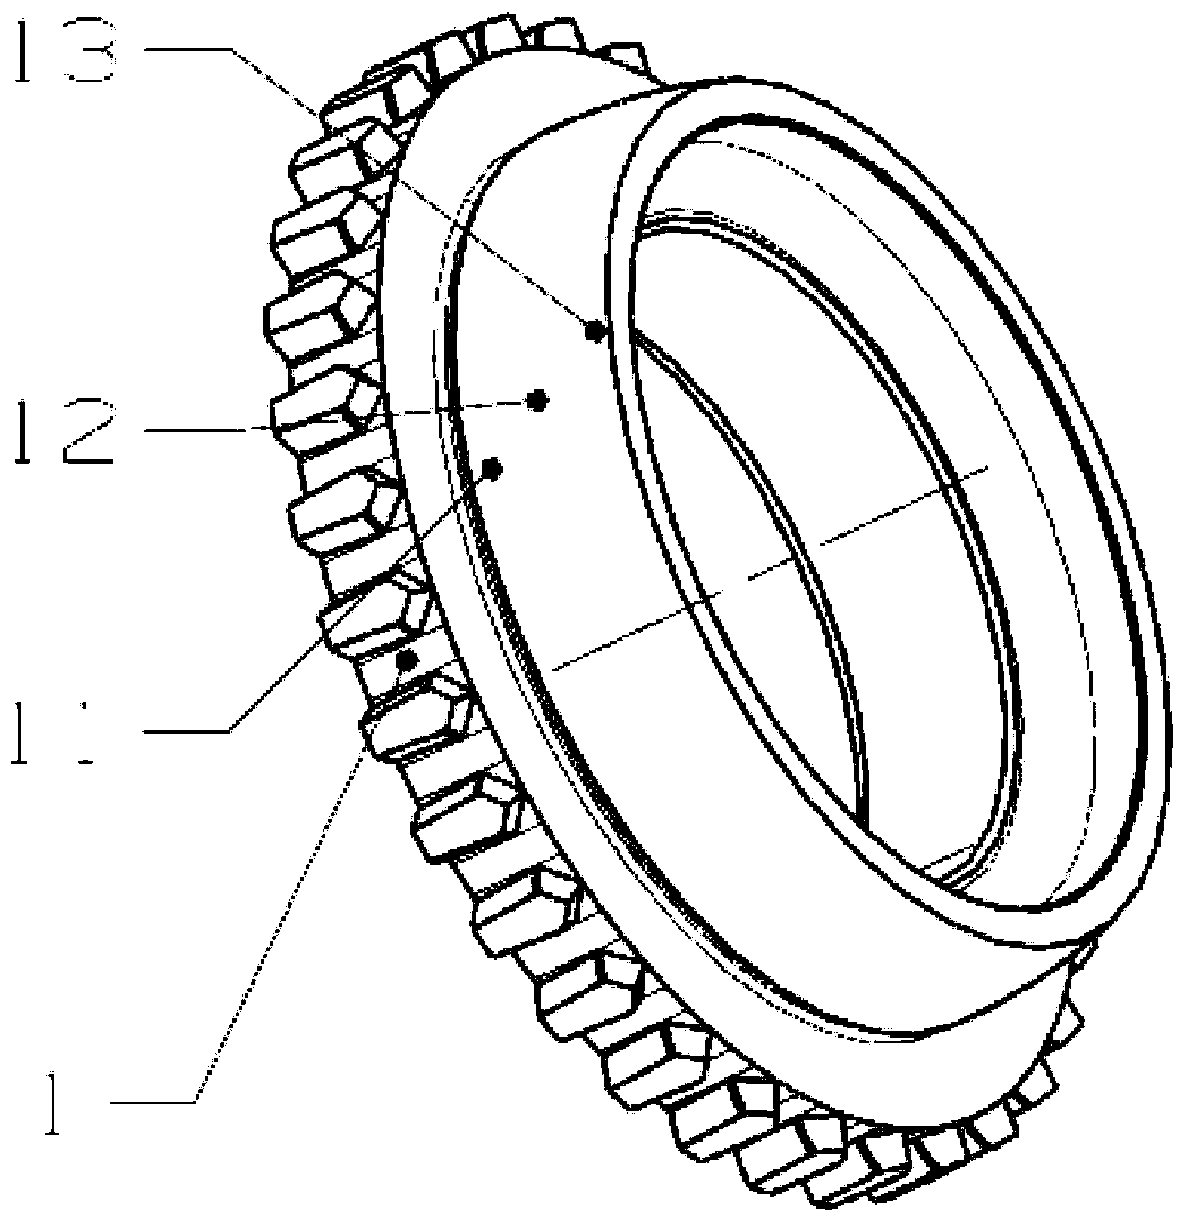 Matched structure of synchronous ring and joint gear ring of automobile manual transmission